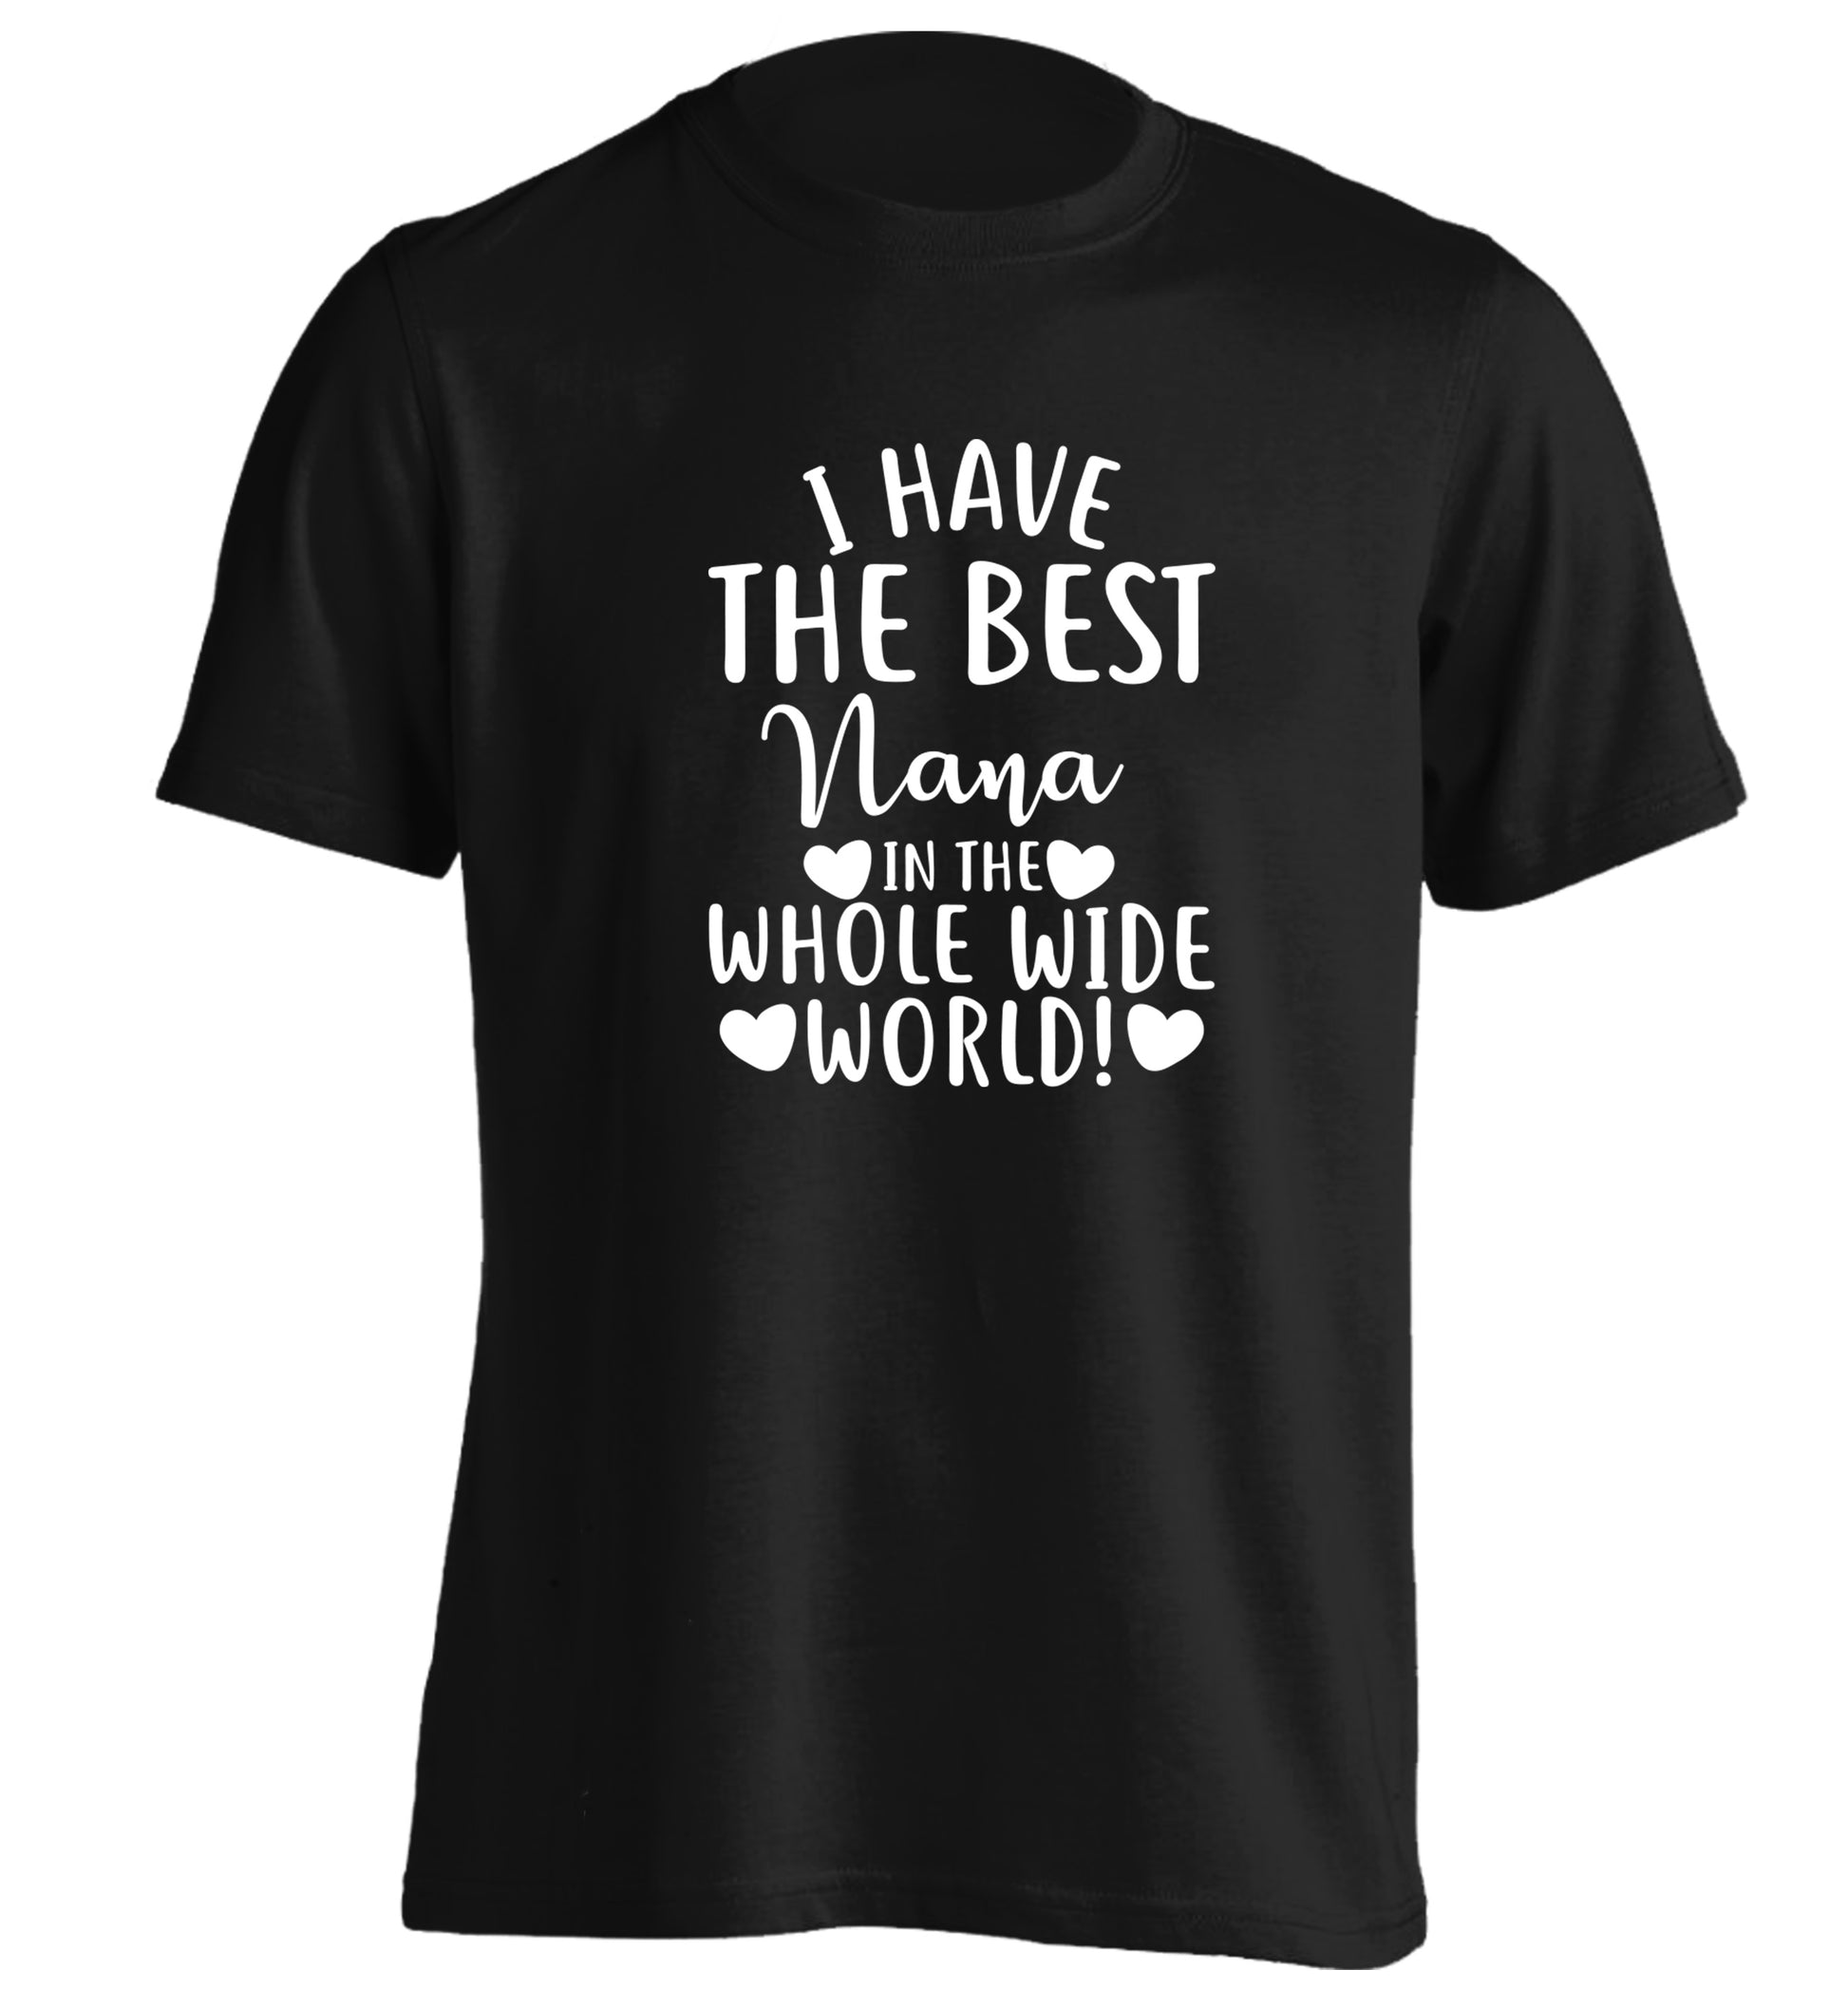 I have the best nana in the whole wide world! adults unisex black Tshirt 2XL